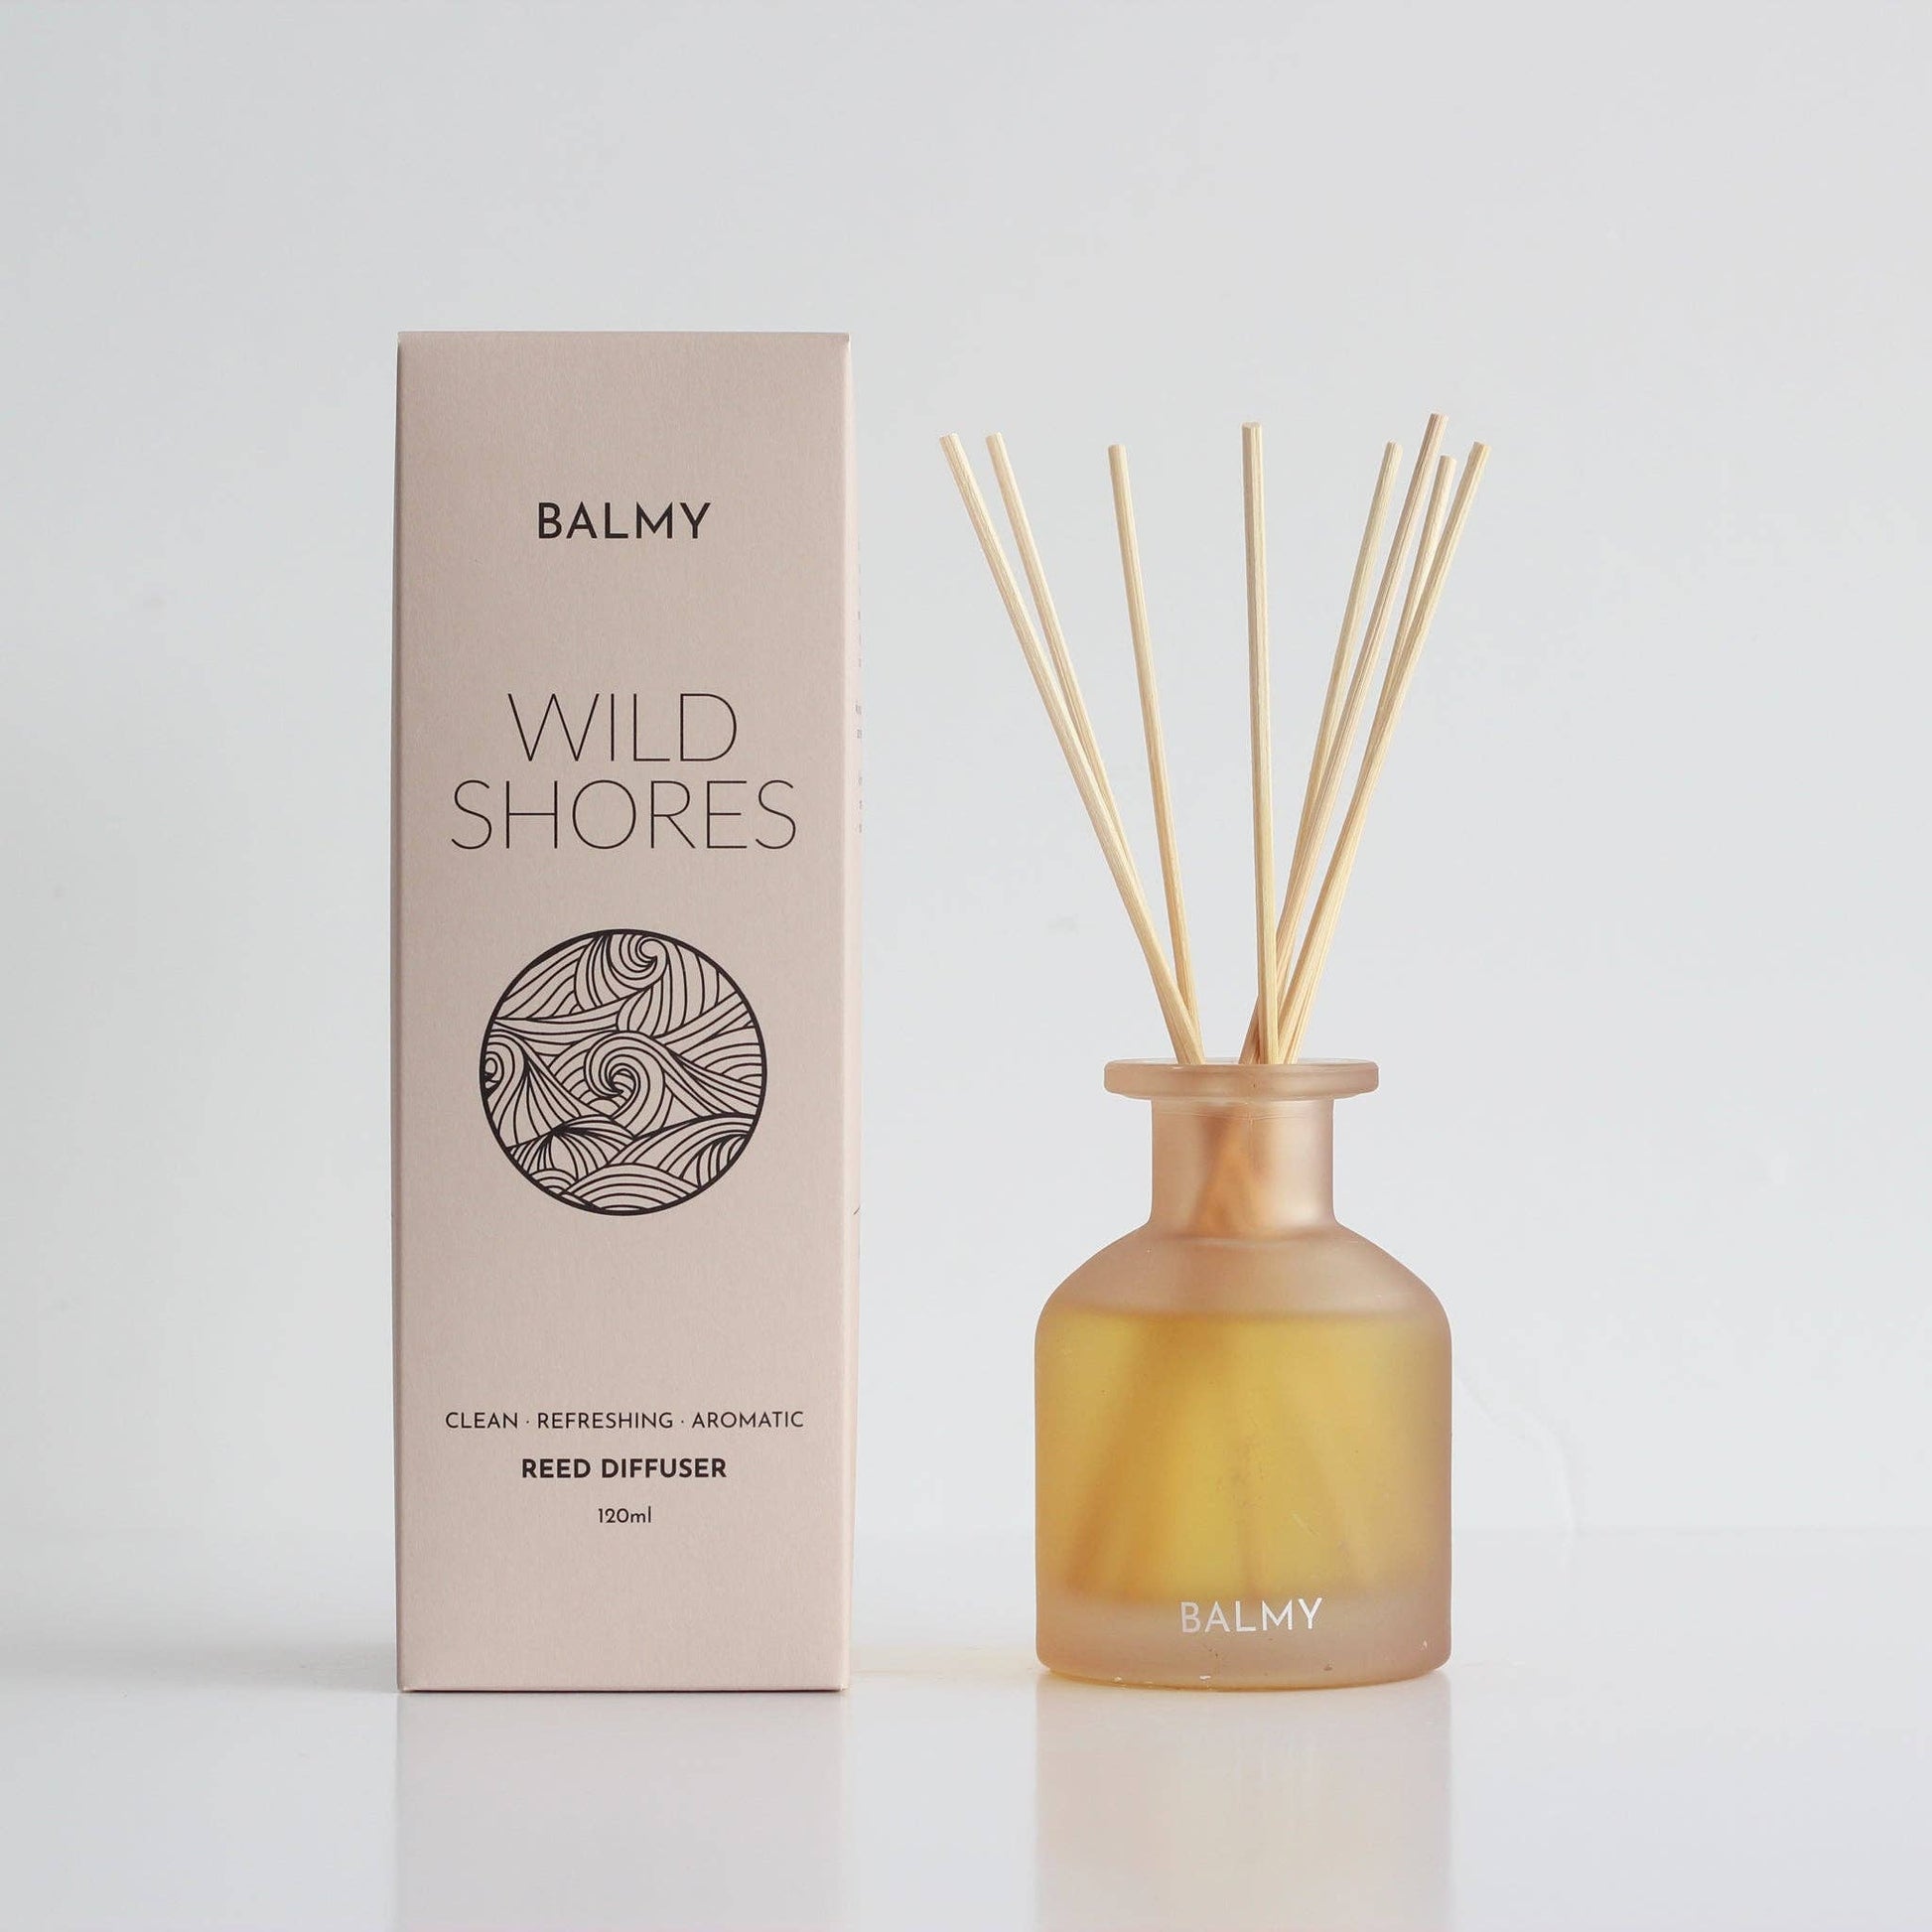 Balmy Wild Shores Reed Diffuser at Joetie Home Fragrance. Luxury Handmade Apothecary Soy Candles